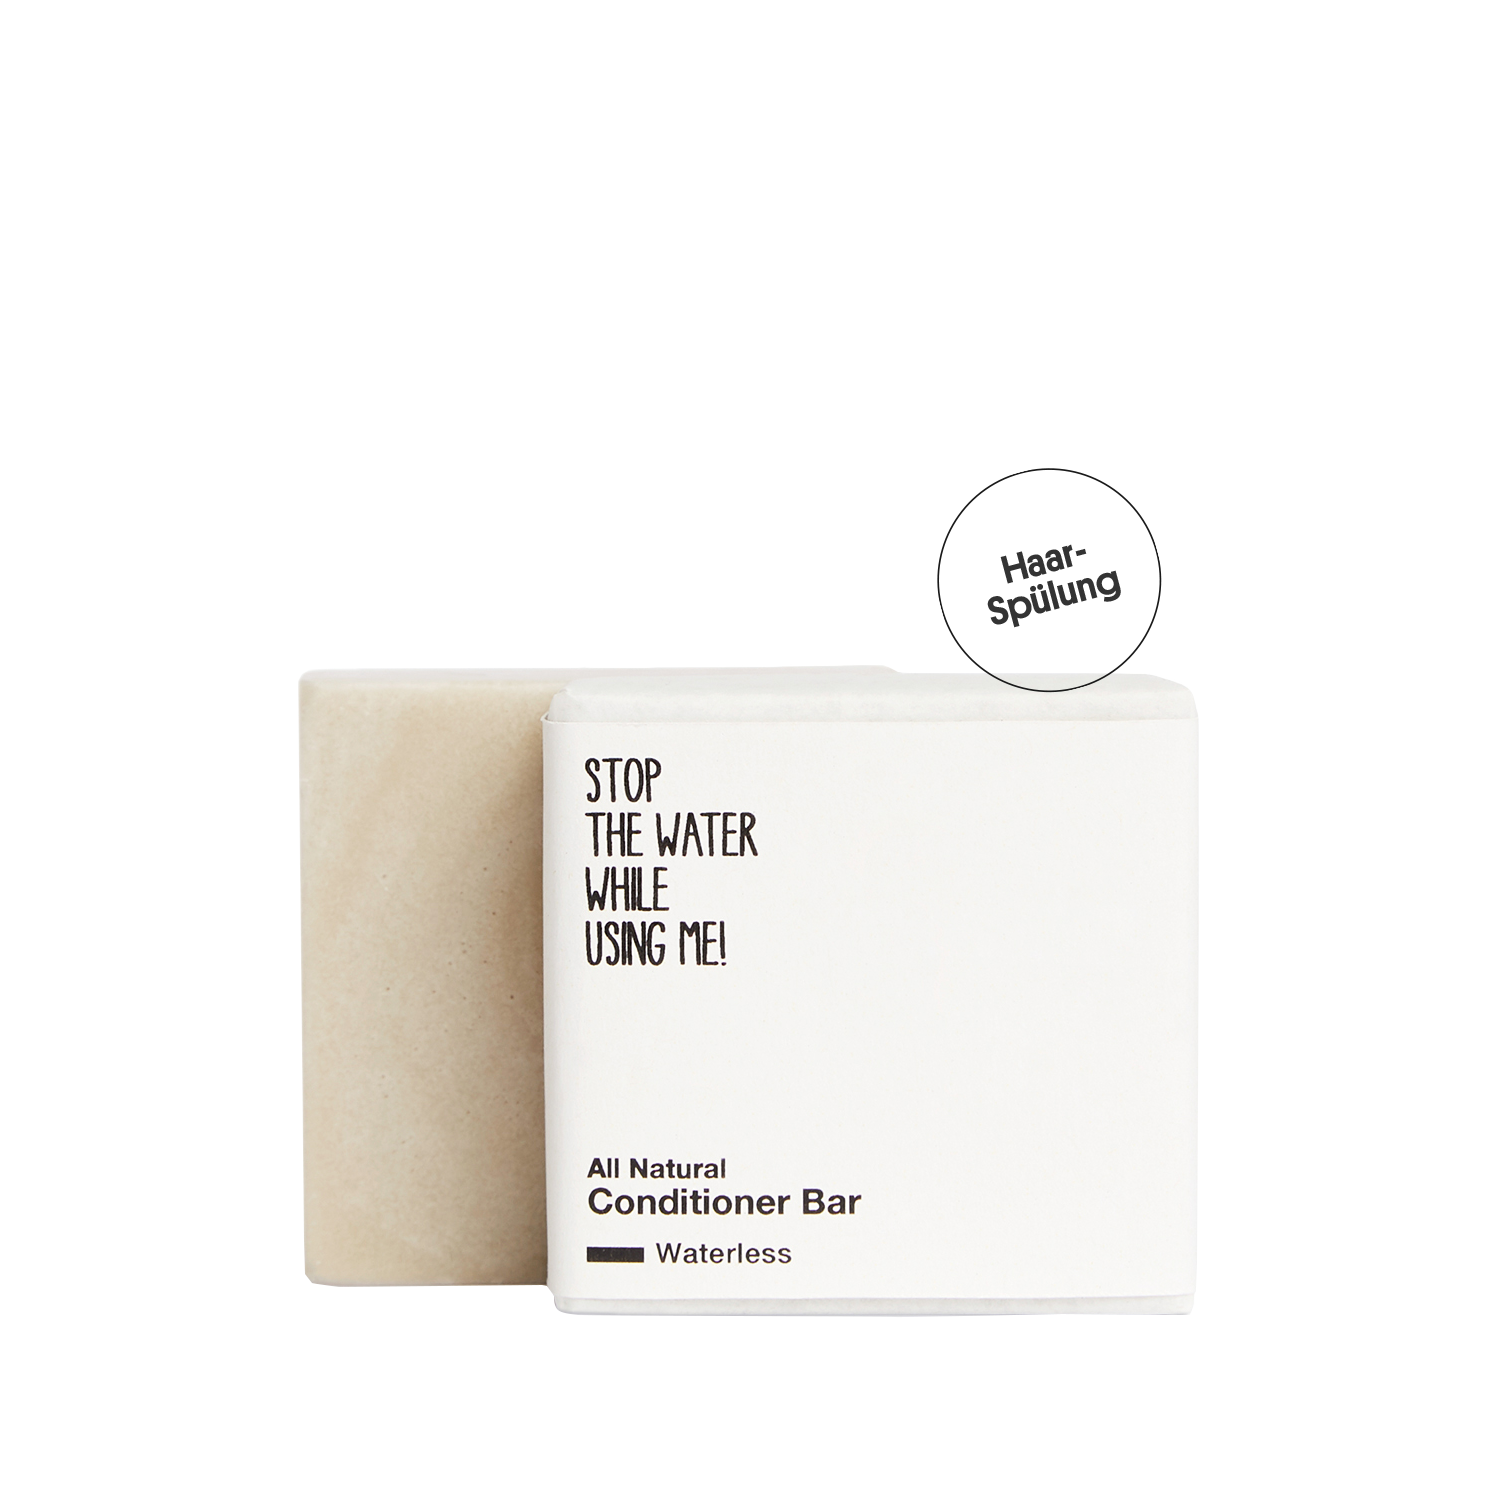 STOP THE WATER WHILE USING ME ! All Natural Conditioner Bar - Waterless Edition, 45 g